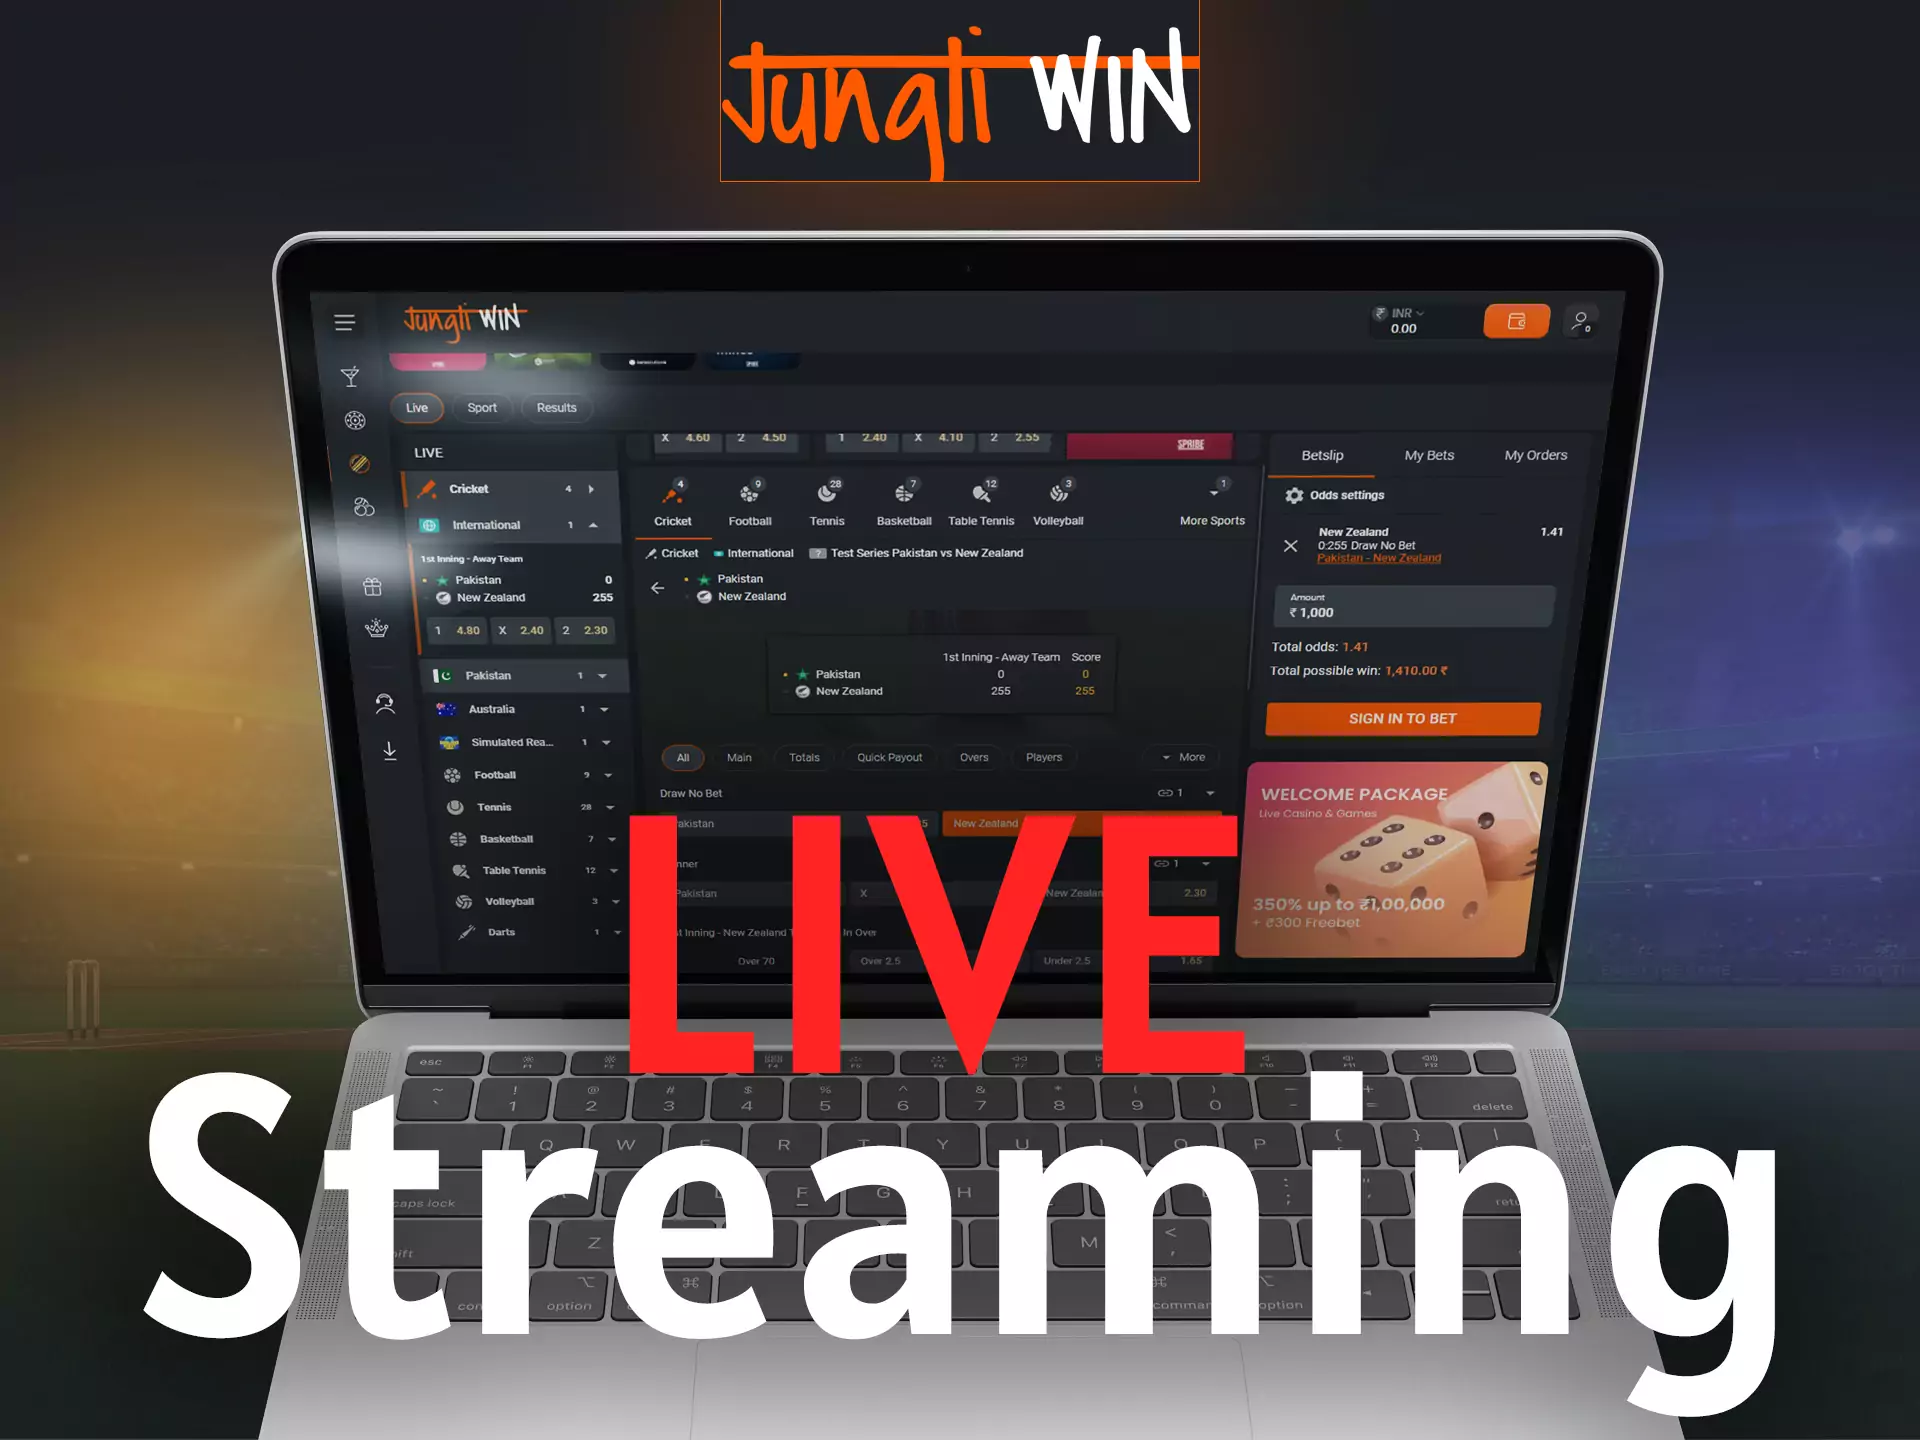 With Jungliwin you can watch live broadcasts of sports events.